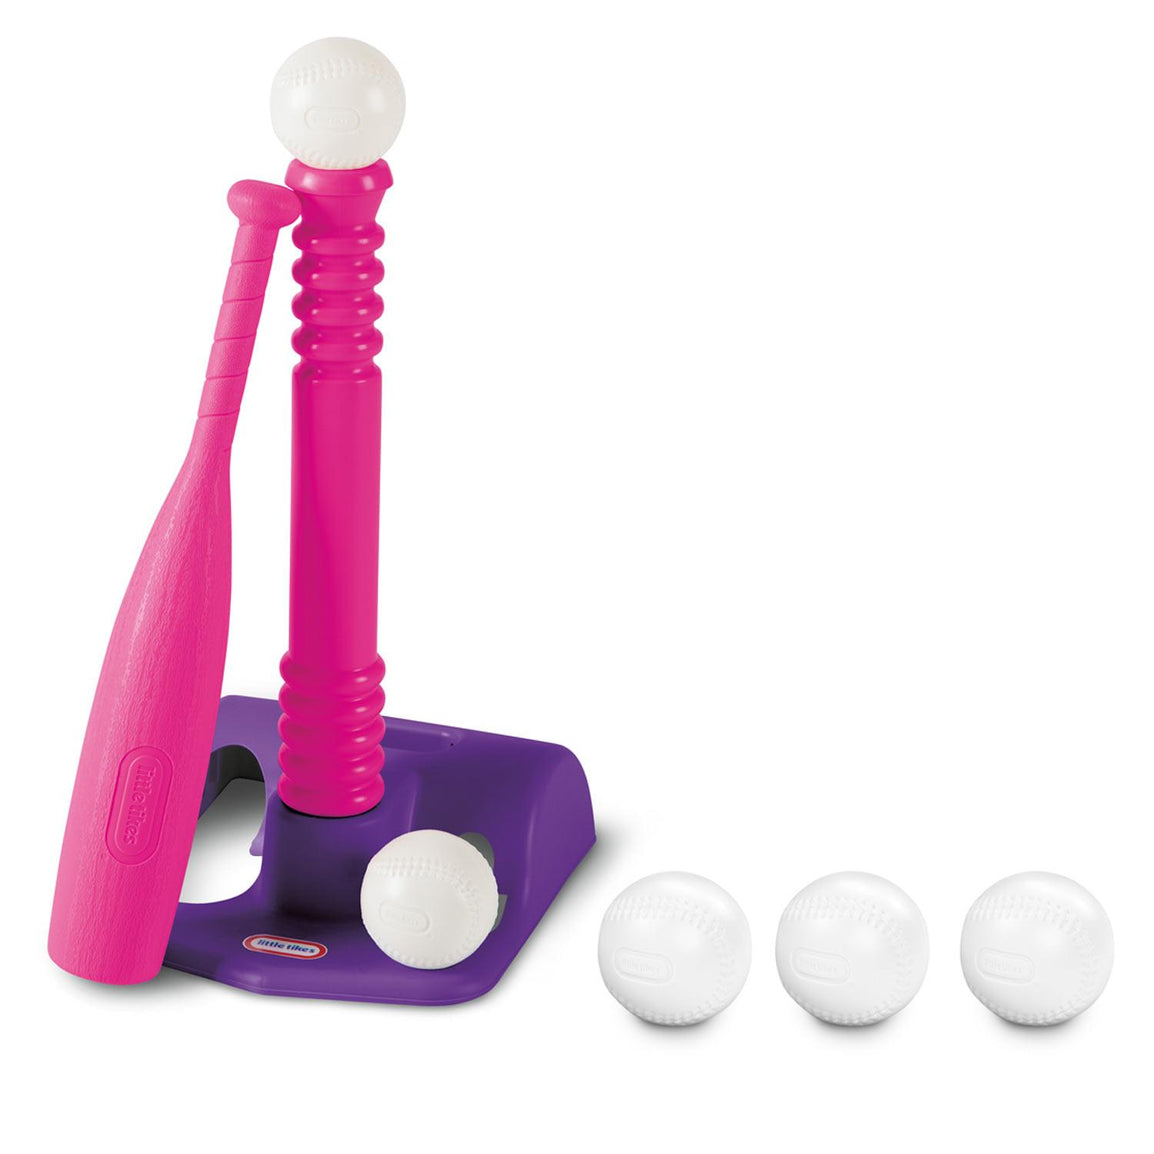 TotSports T-Ball Set with Five Balls Pink and Purple